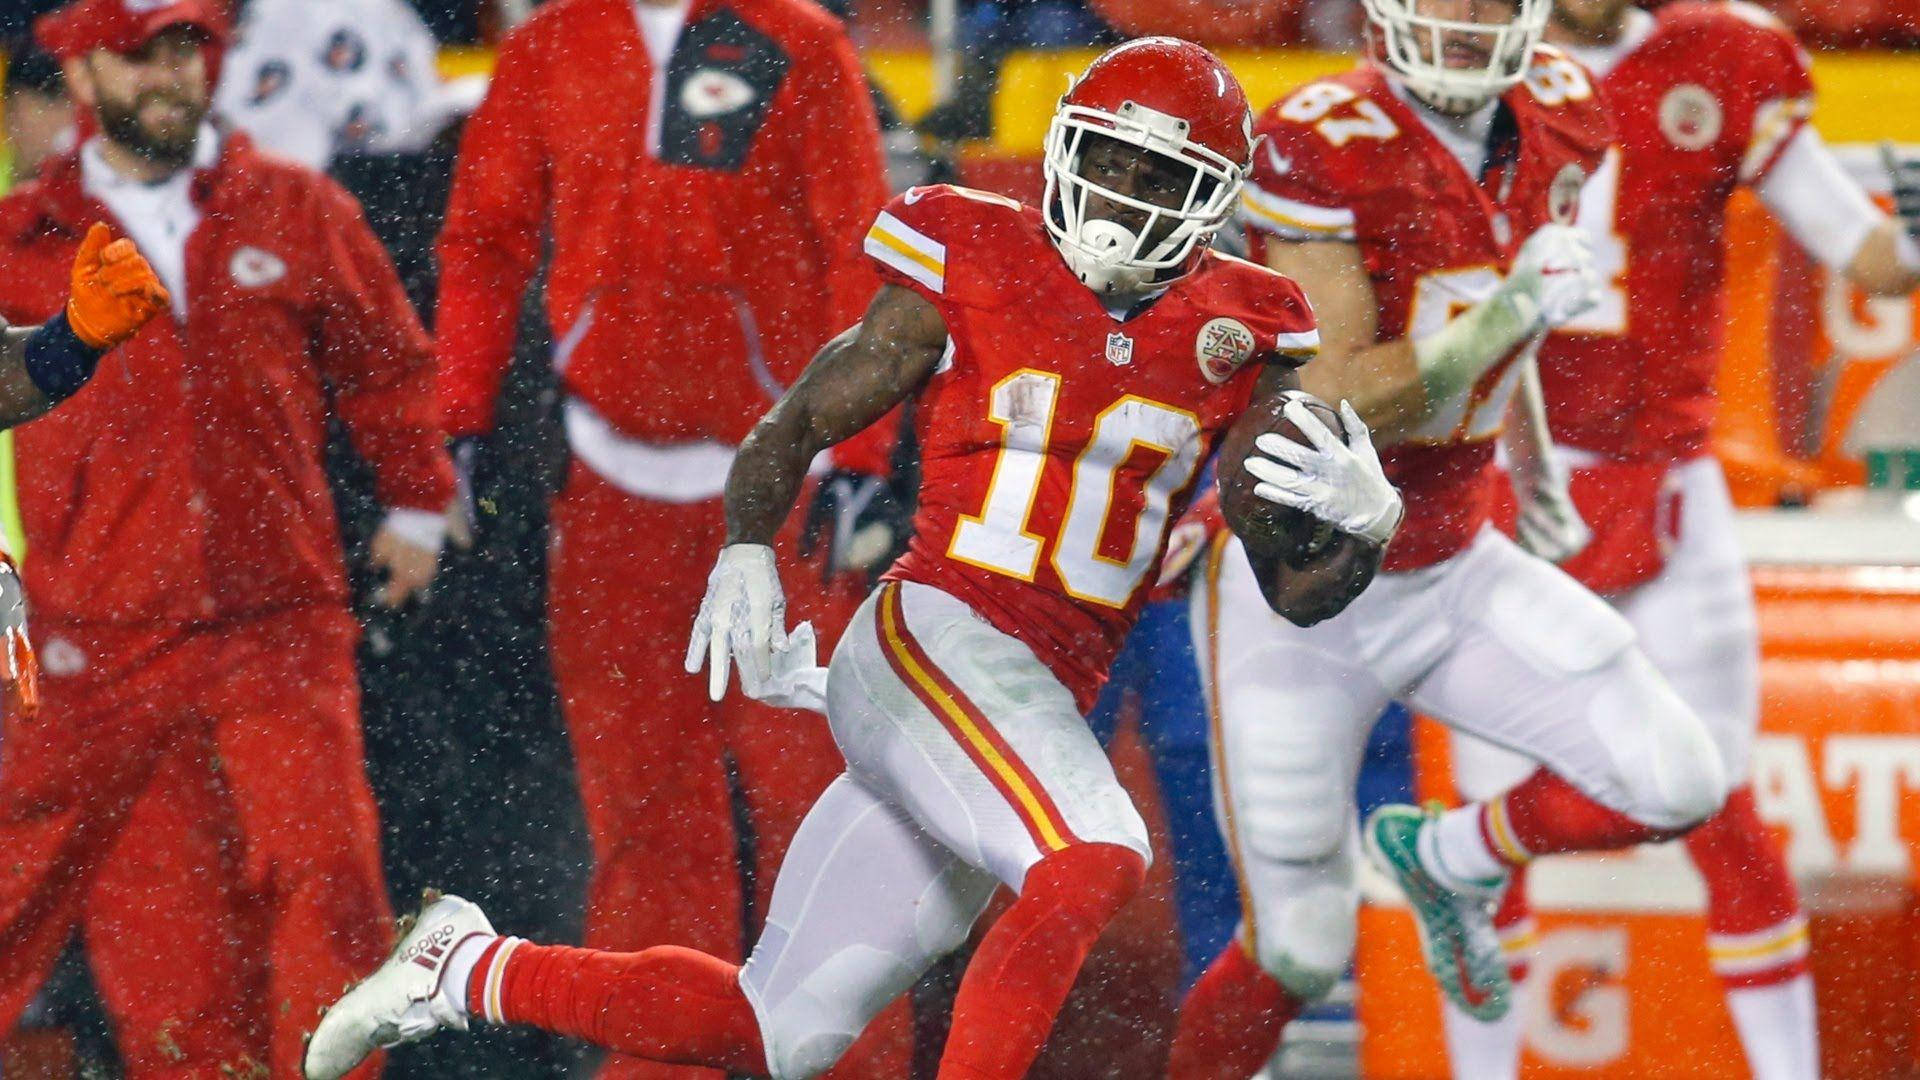 Tyreek Hill in Action - Speed and Agility on Display Wallpaper